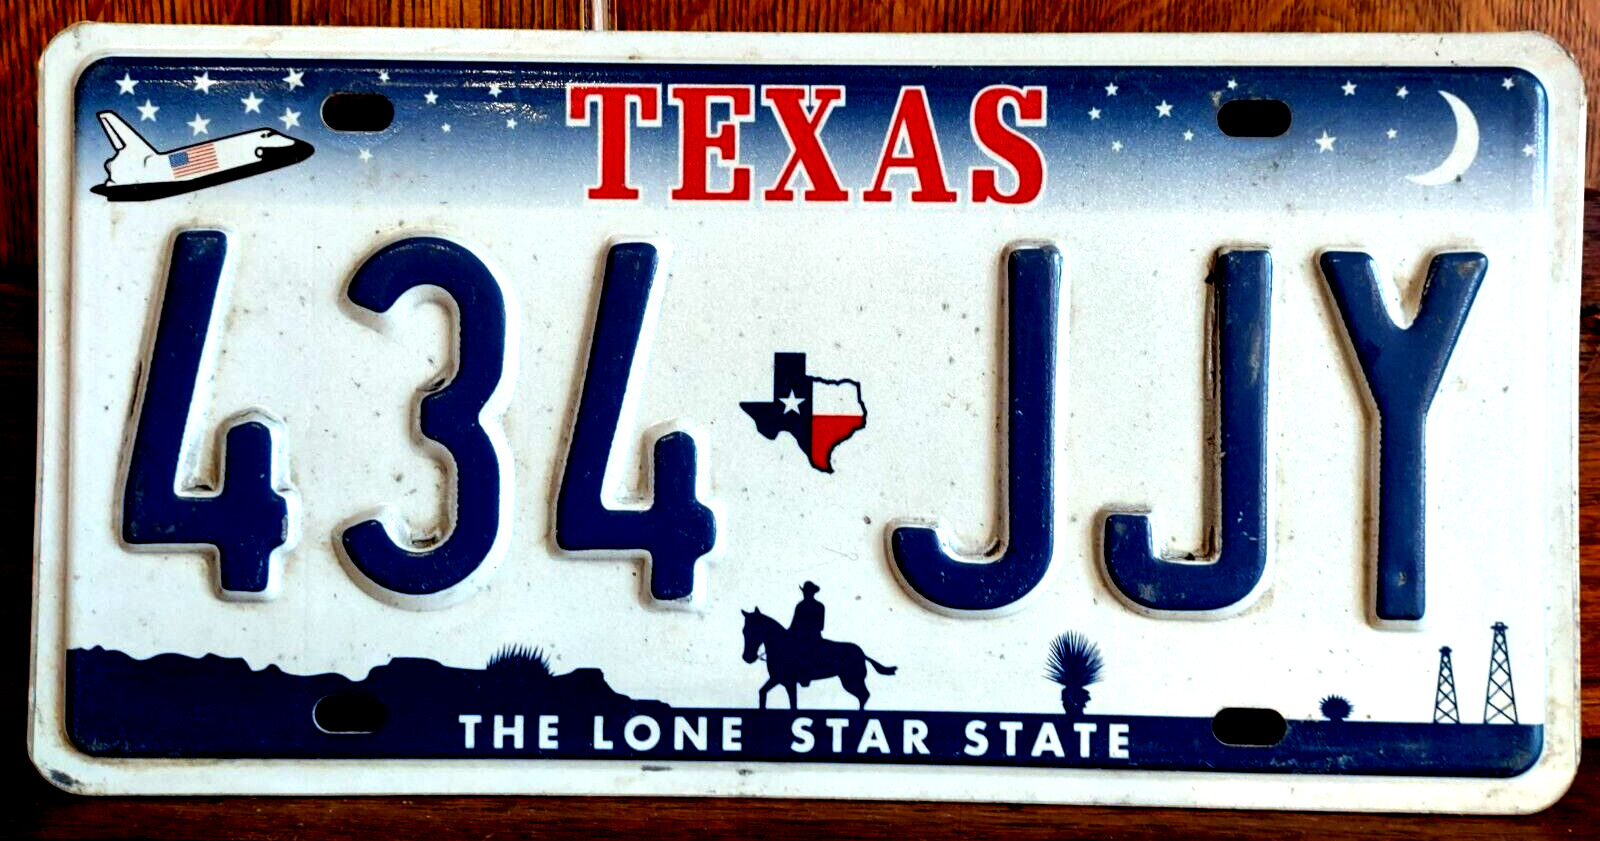 Texas Lone Star State 1990\'s Blue on White Metal Expired License Plate 434 JJY